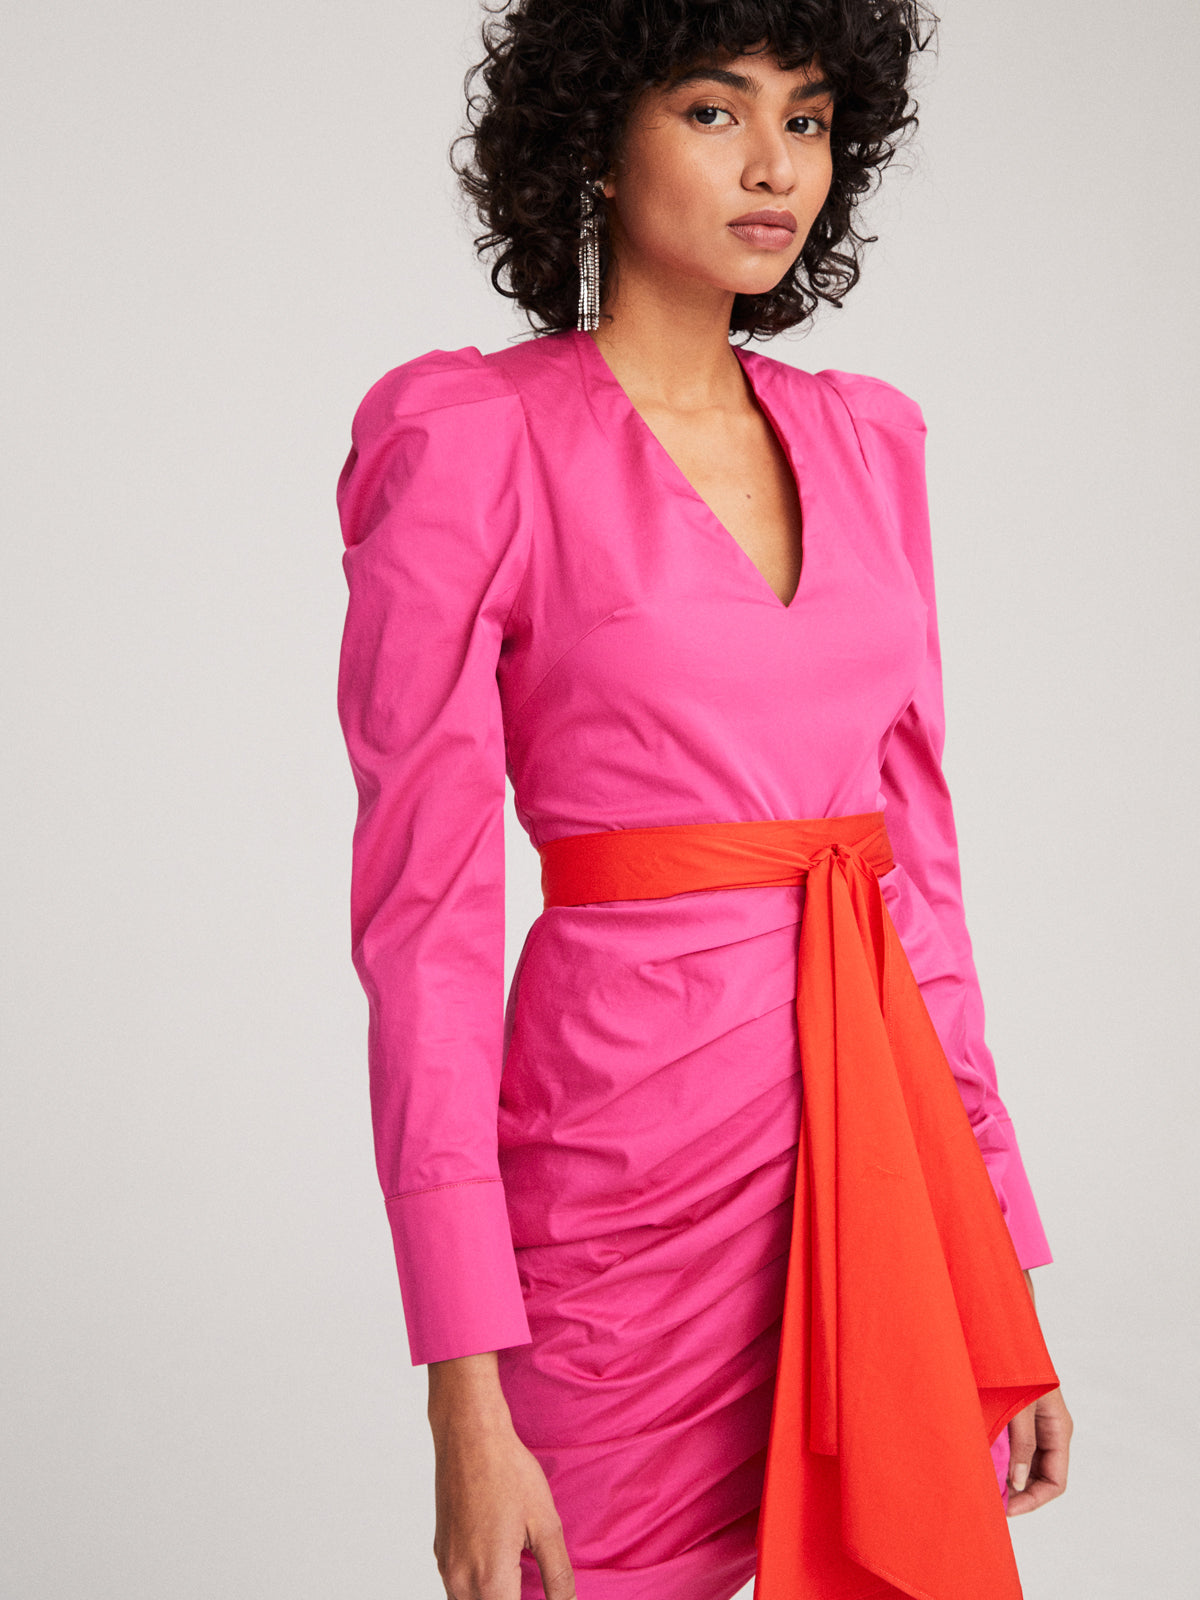 mioh | #MALIBU - Short fuchsia dress for wedding and party guest – MIOH